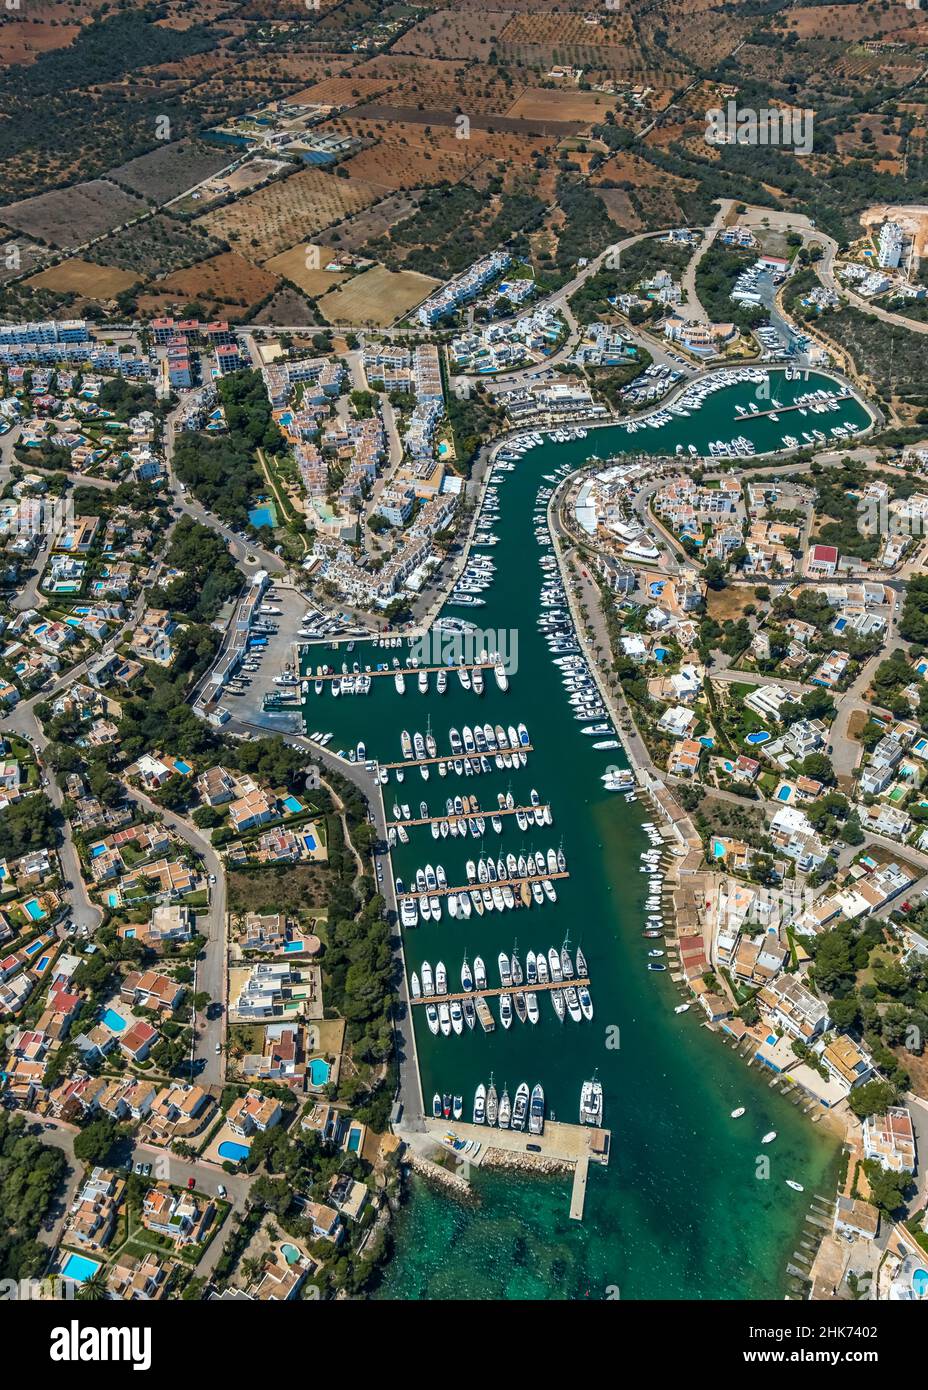 LAerial view, Local view Cala d'Or with marina, Felanitx, Balearic Islands, Majorca, Balearic Islands, Spain, Europe, ES, Travel, Tourism, Destination Stock Photo